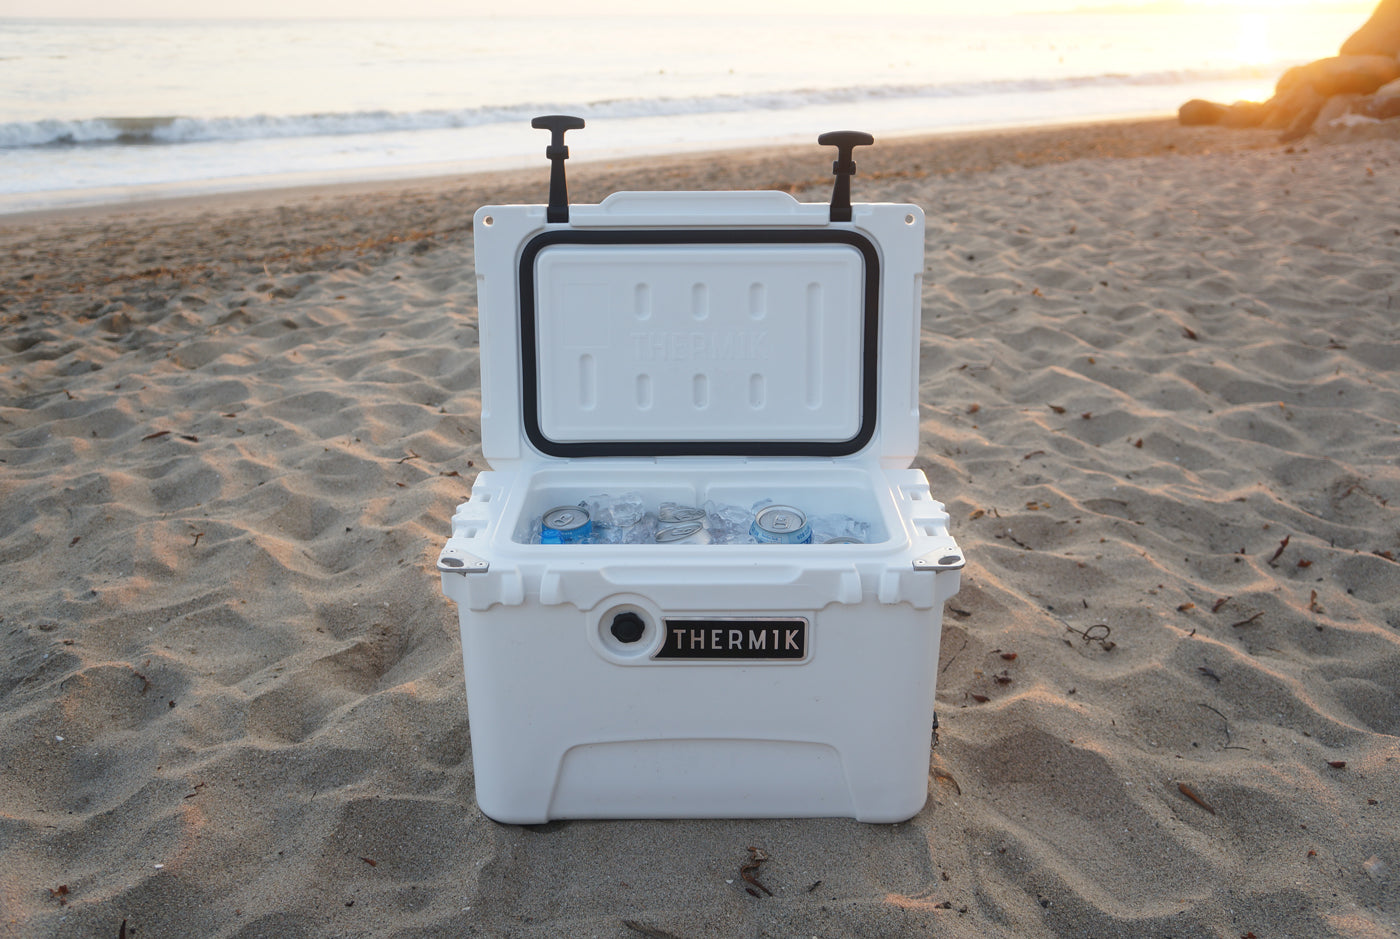 Thermik cooler at the beach